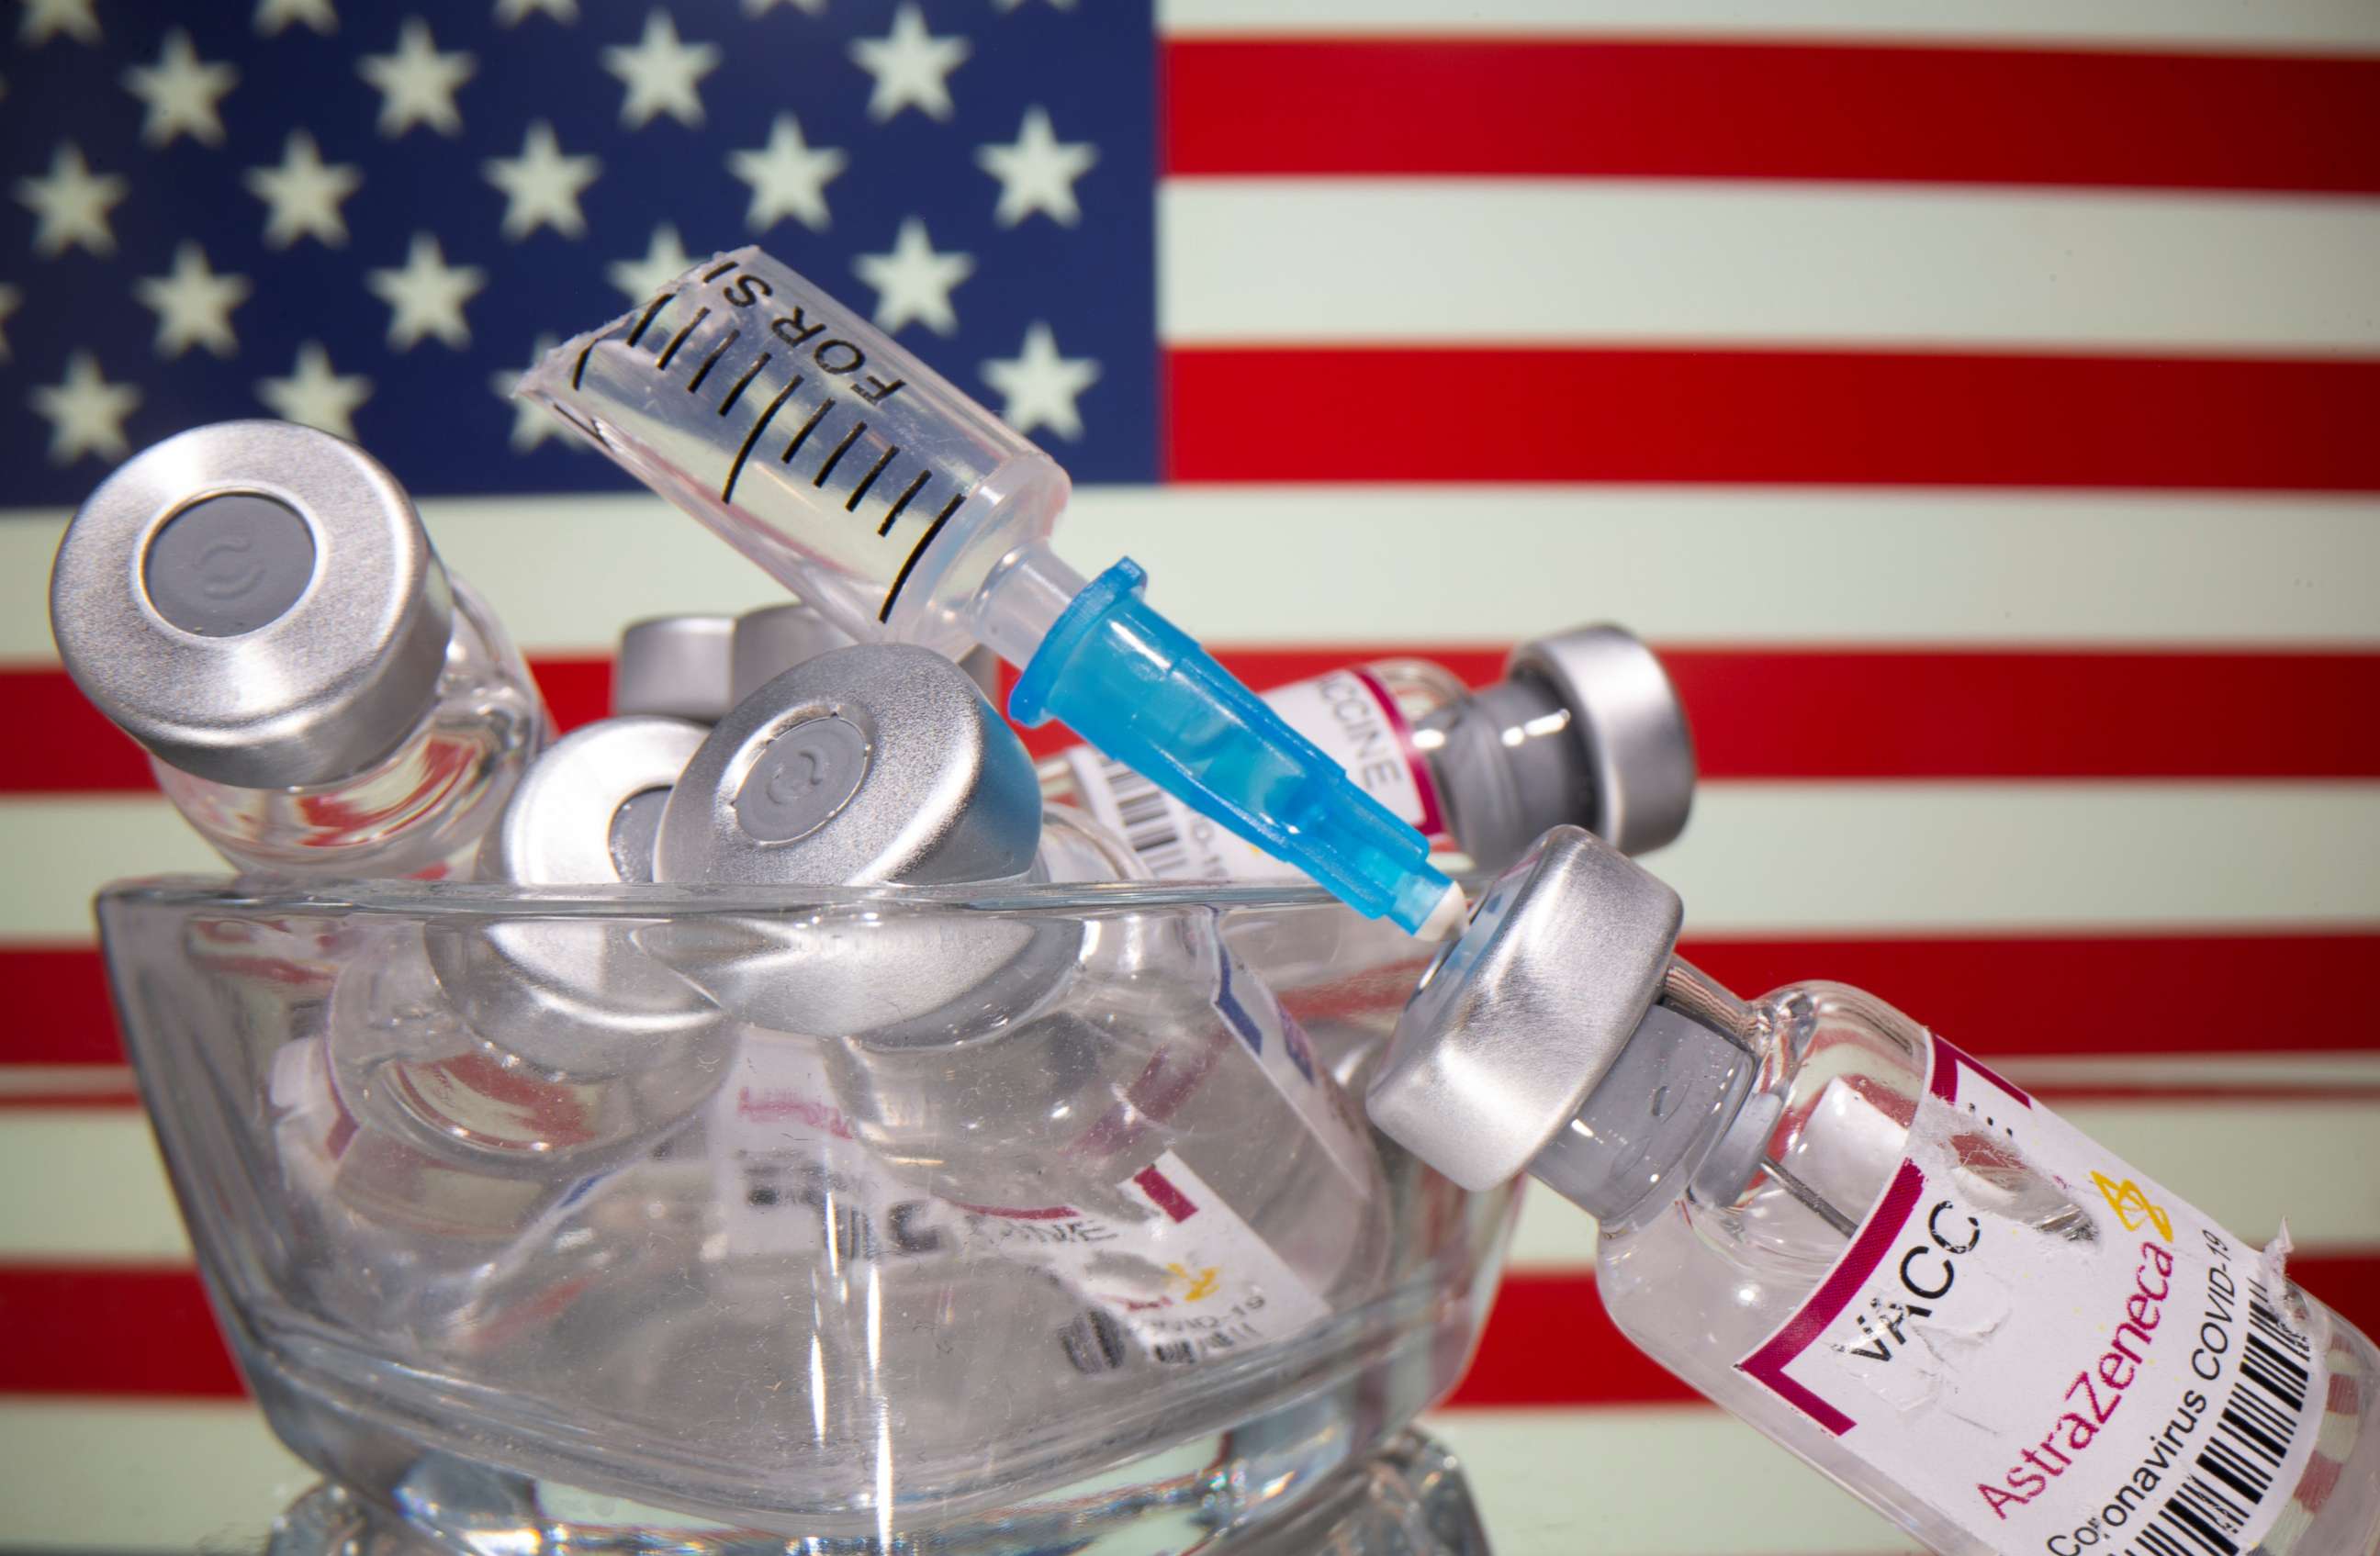 PHOTO: Vials labelled with broken sticker "AstraZeneca COVID-19 Coronavirus Vaccine" and a broken syringe are seen in front of a displayed U.S. flag in this illustration taken March 15, 2021.